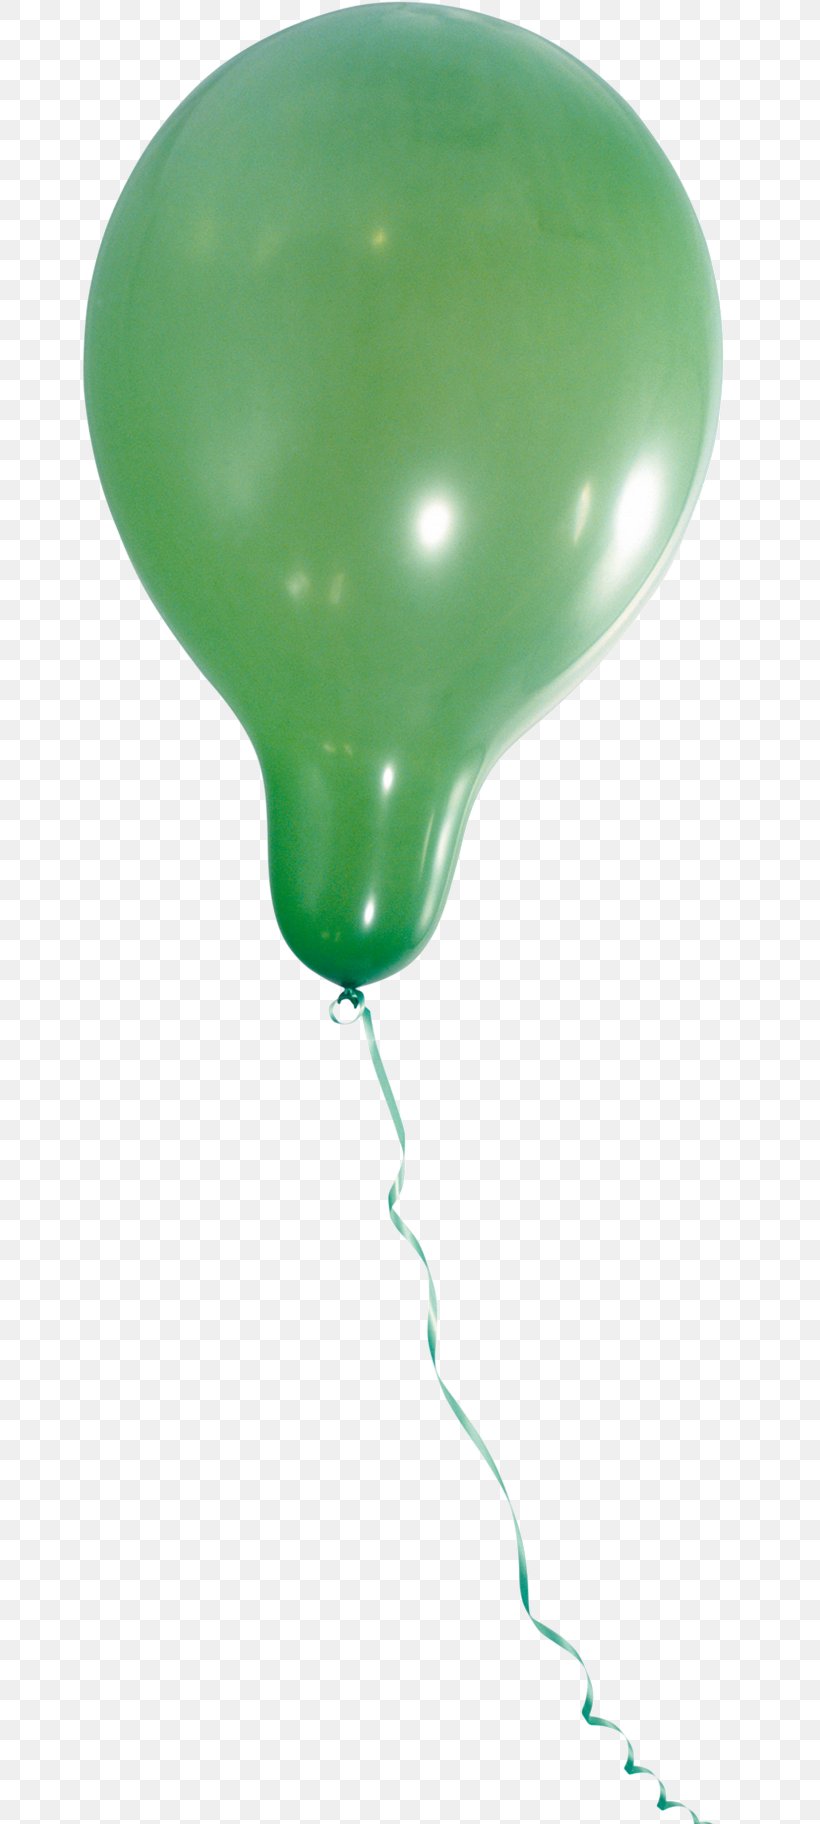 Toy Balloon Green Party, PNG, 670x1824px, Balloon, Green, Party, Party Supply, Toy Balloon Download Free